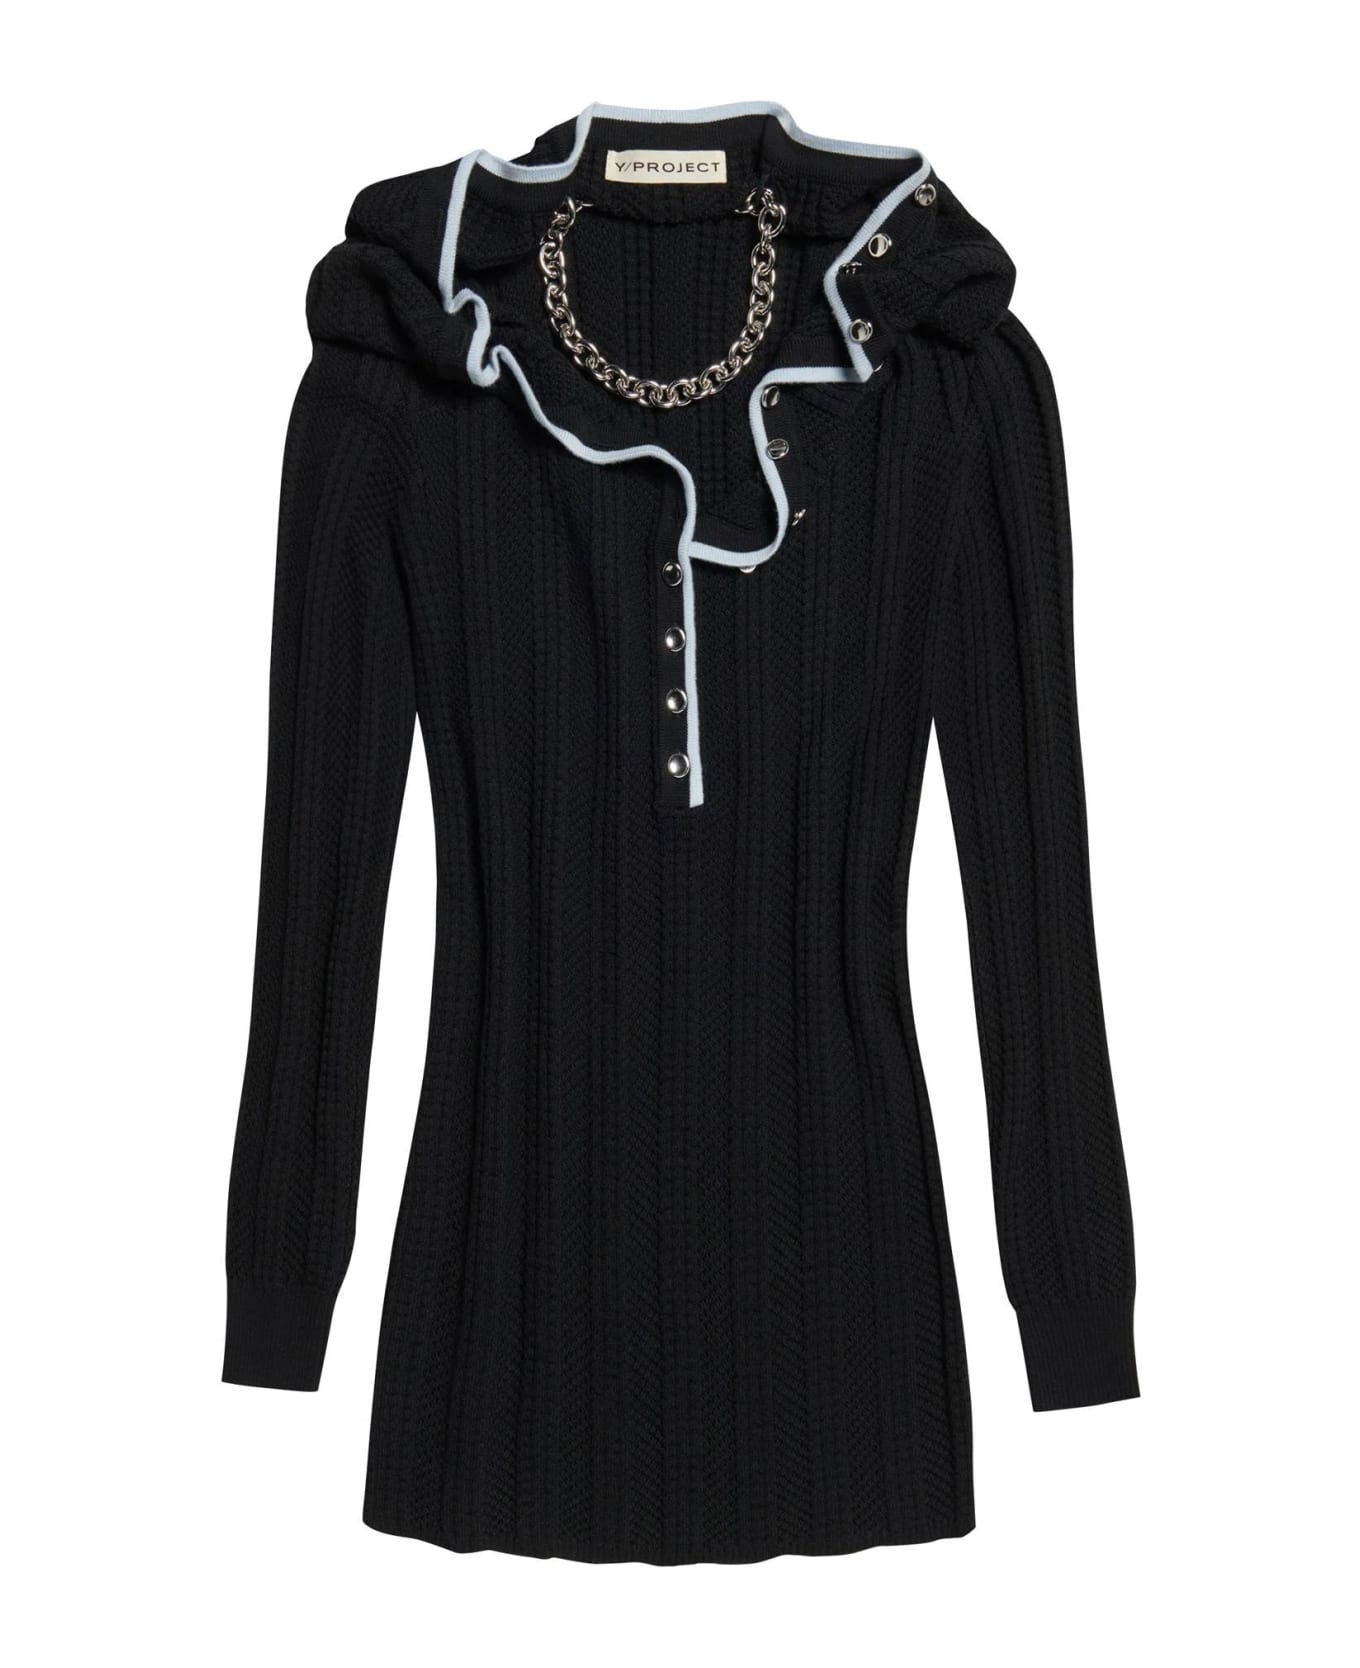 Y/Project Merino Wool Dress With Necklace - EVERGREEN BLACK (Black)